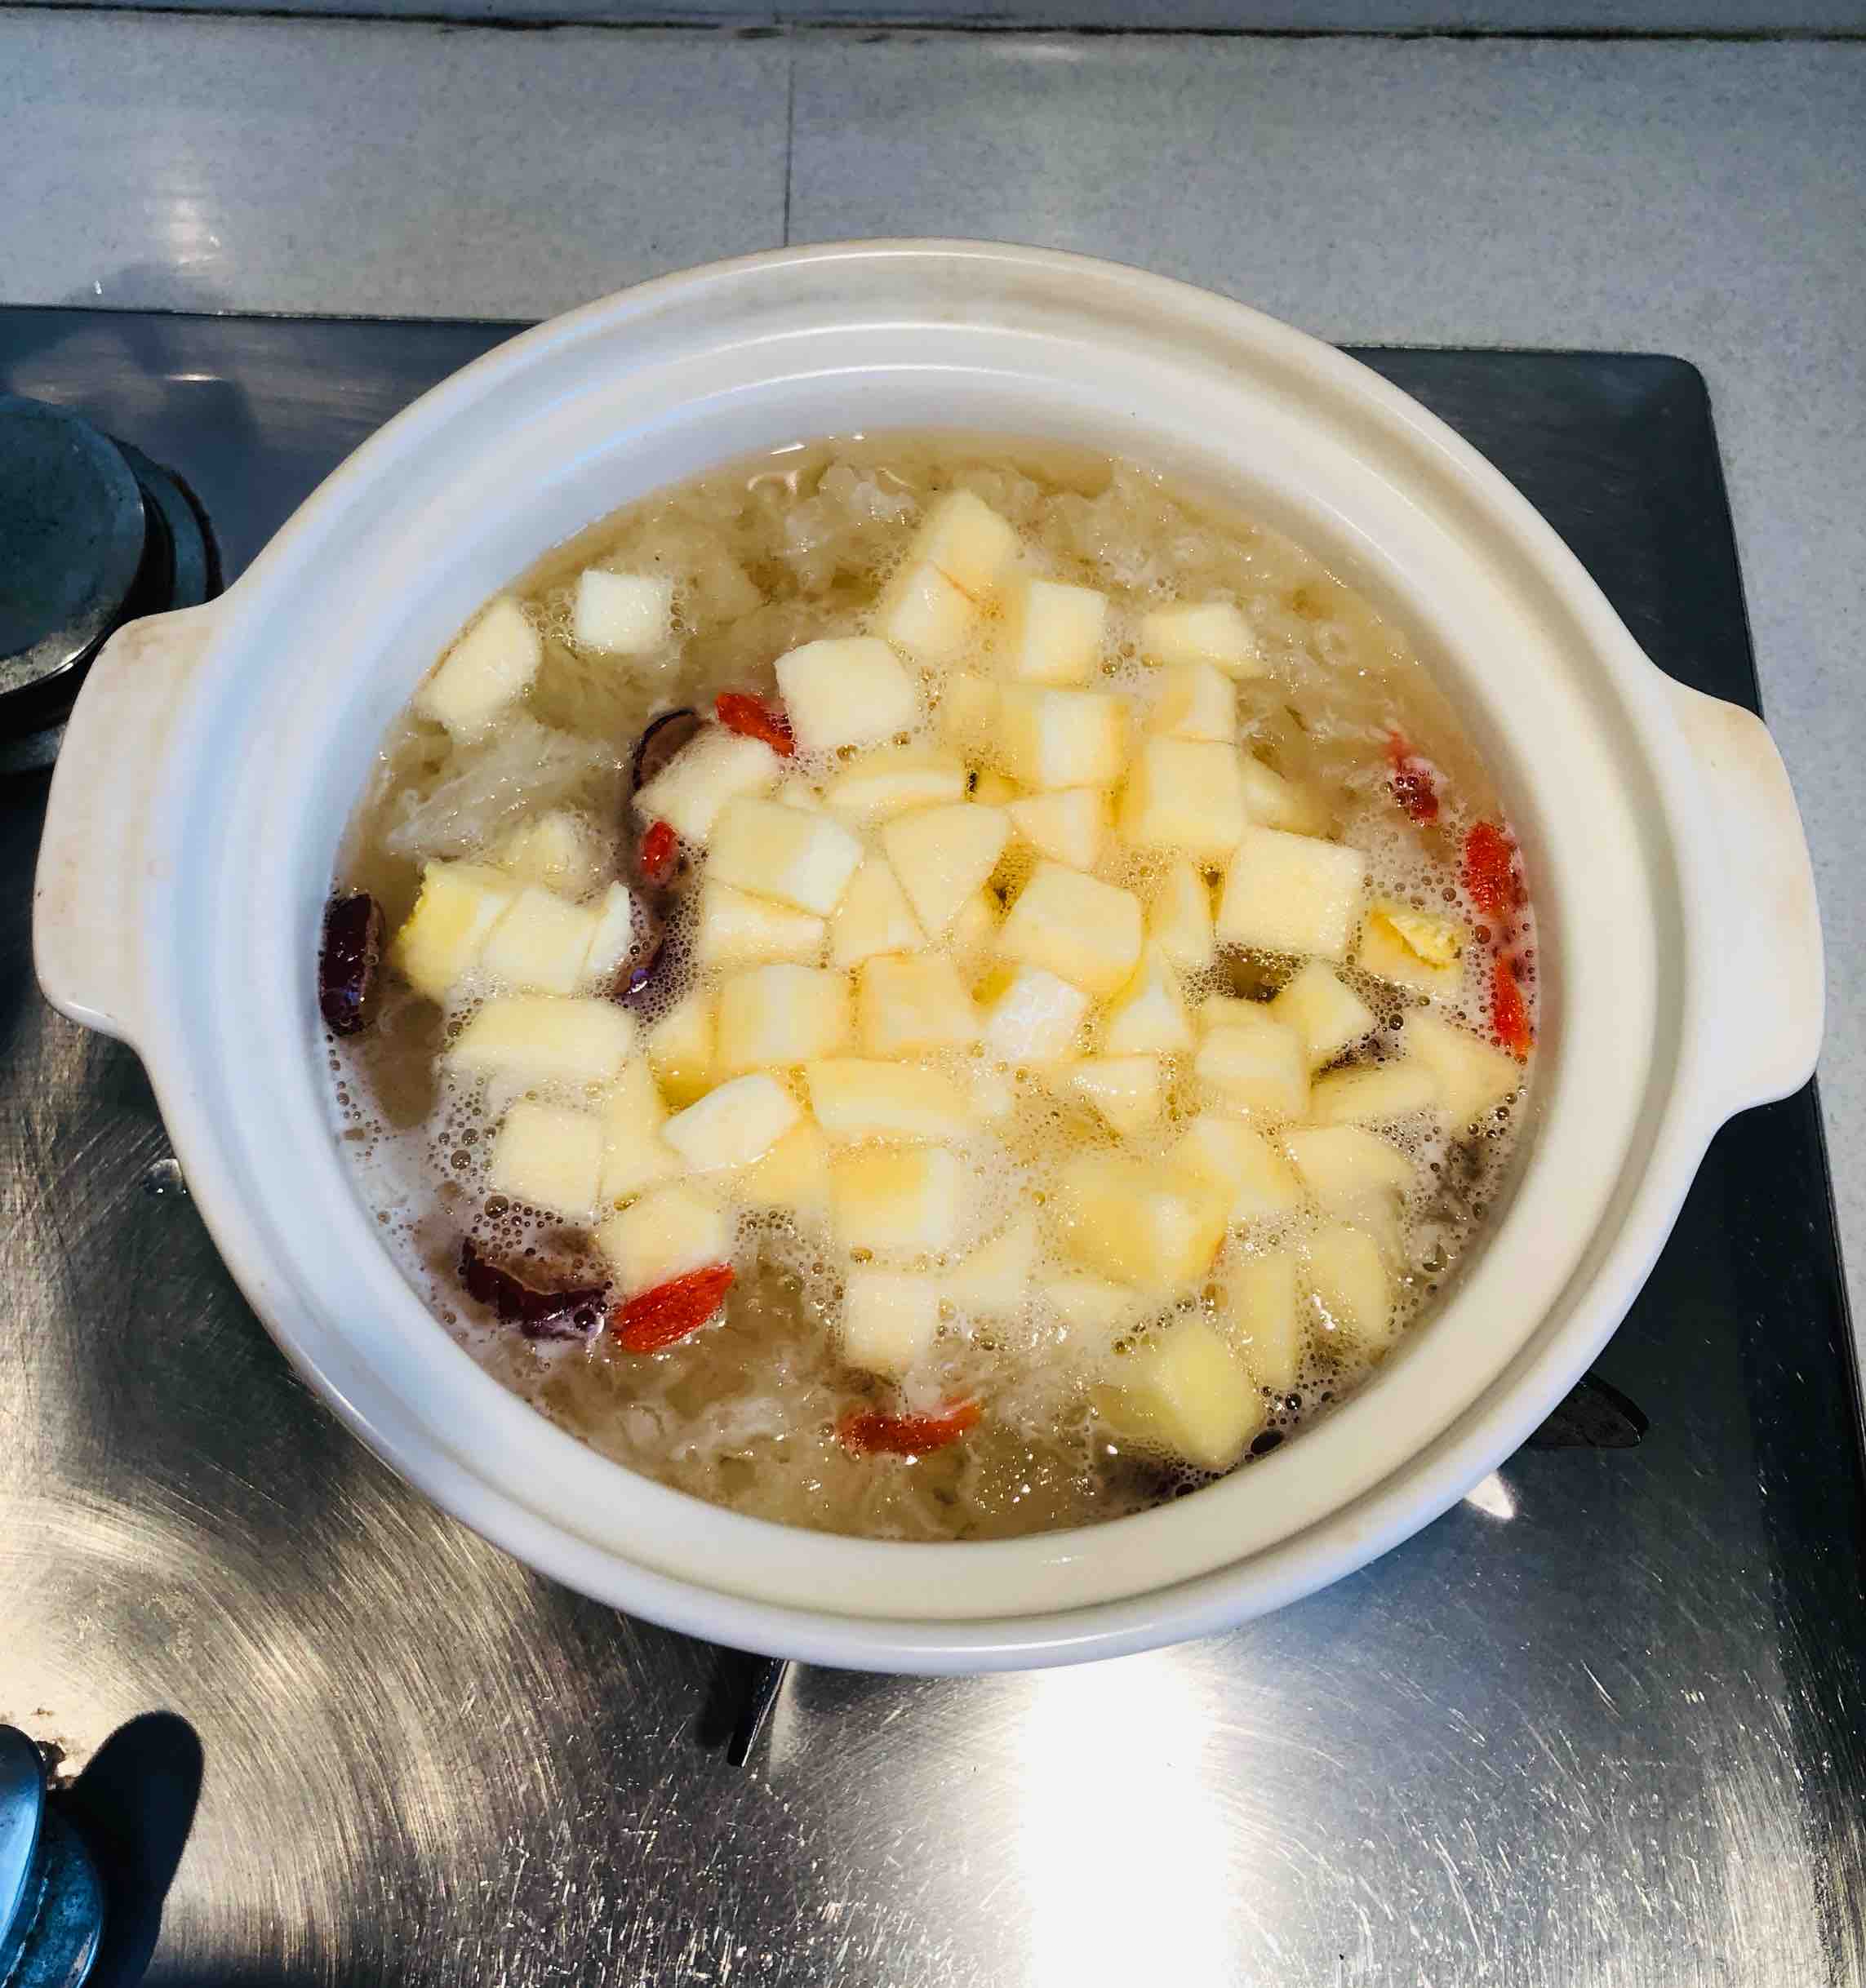 Apple, Red Dates and White Fungus Soup for Beauty and Beauty recipe